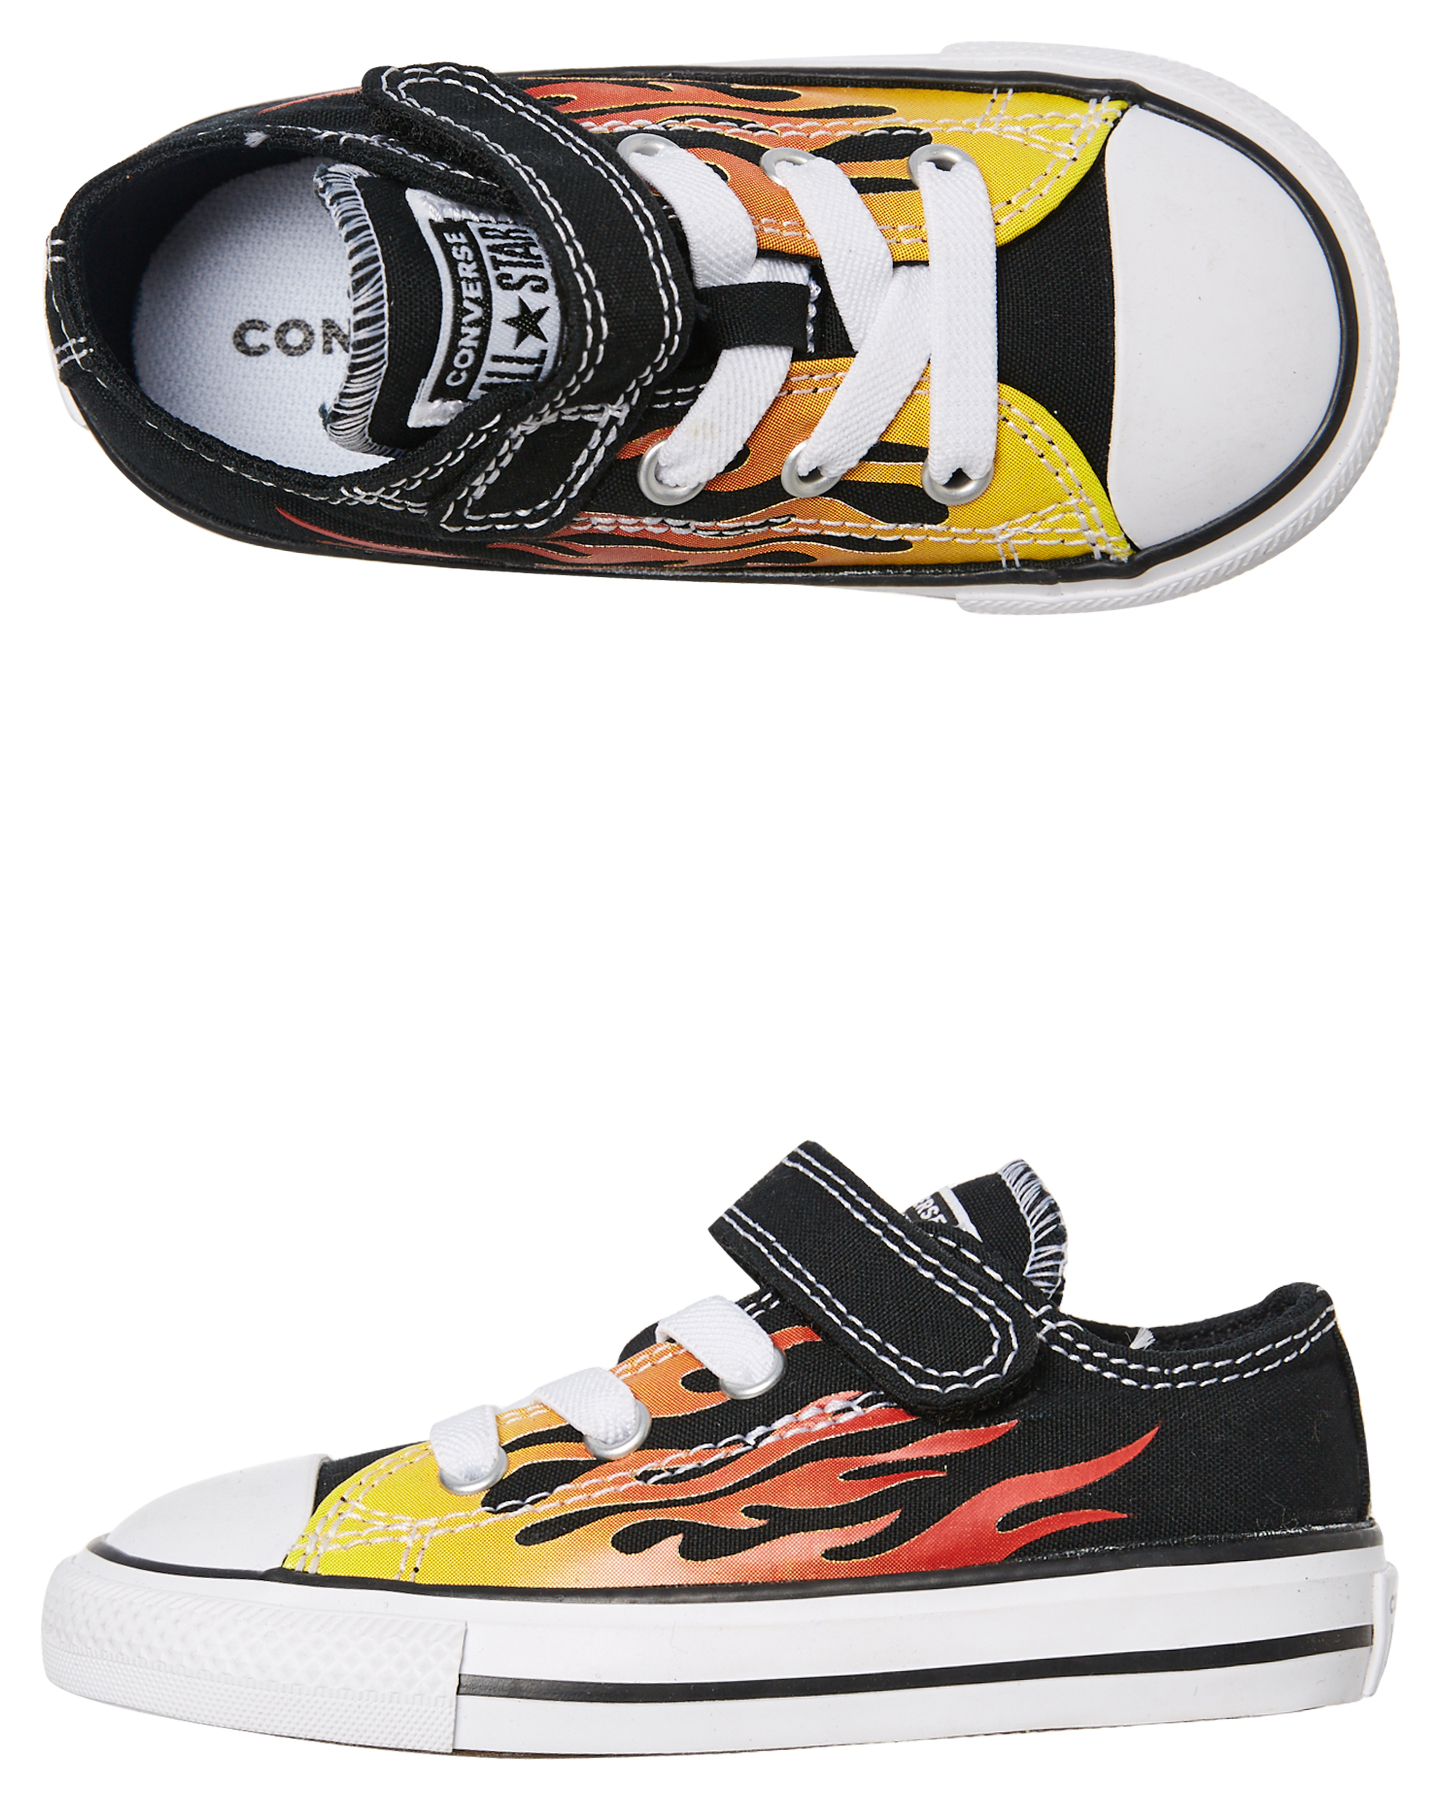 Converse Taylor All Star Flame Shoe - Toddler - Black |